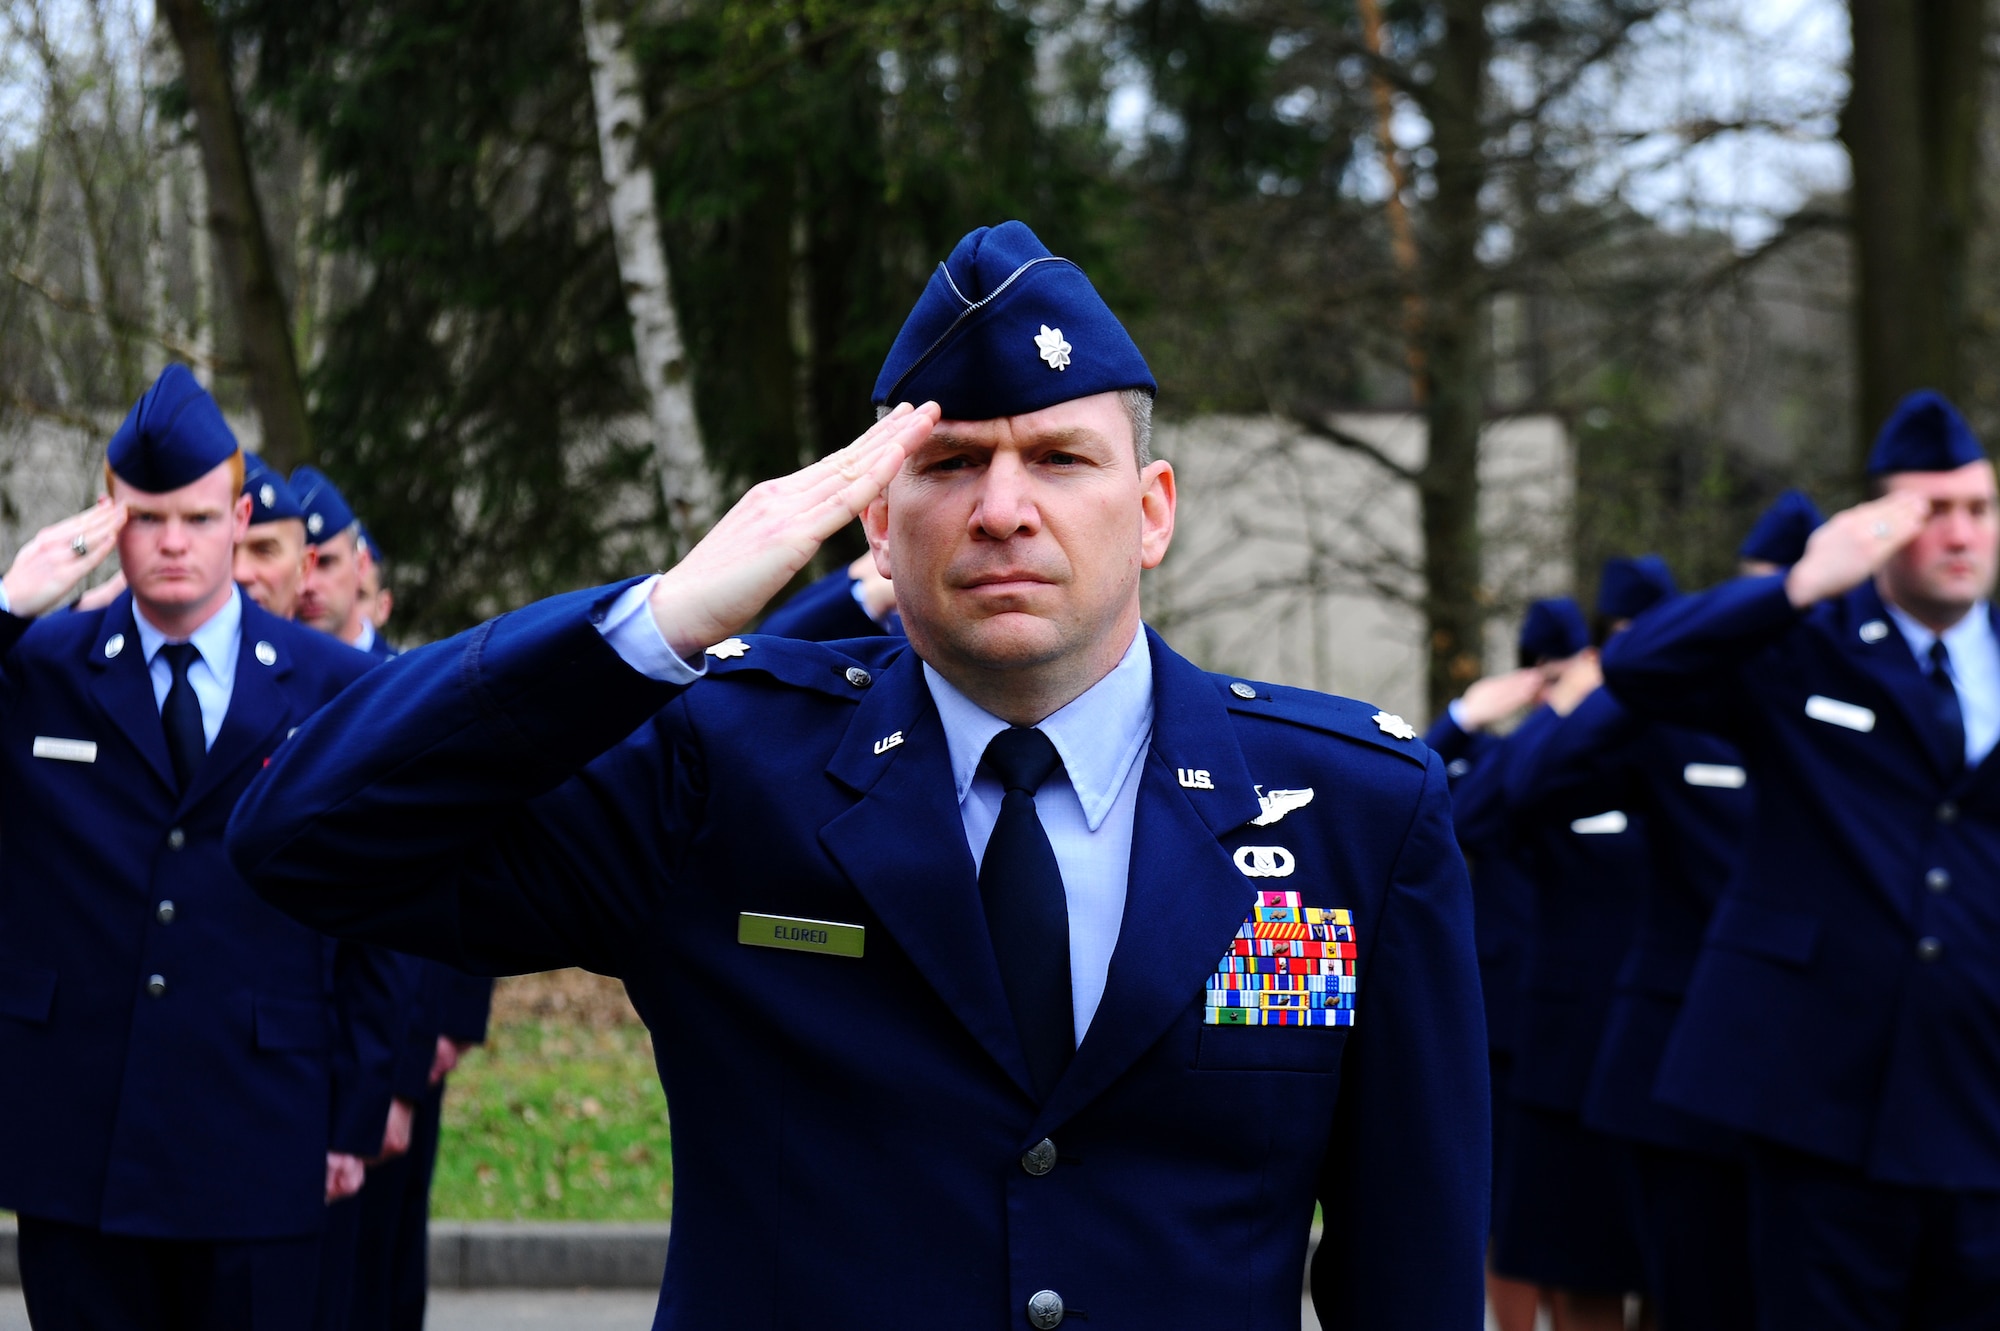 Air Force members from the 76th Airlift Squadron salute during a memorial ceremony on Ramstein Air Base, Germany, April 5, 2012. On April 3, 1996, a CT-43 aircraft that was assigned to the 76th AS crashed outside of Dubrovnik Croatia during a peacekeeping mission. The squadron honored the six crew members of flight IFO-21 this year marking the 16th anniversary. (U.S. Air Force photo by Amn Brea Miller)